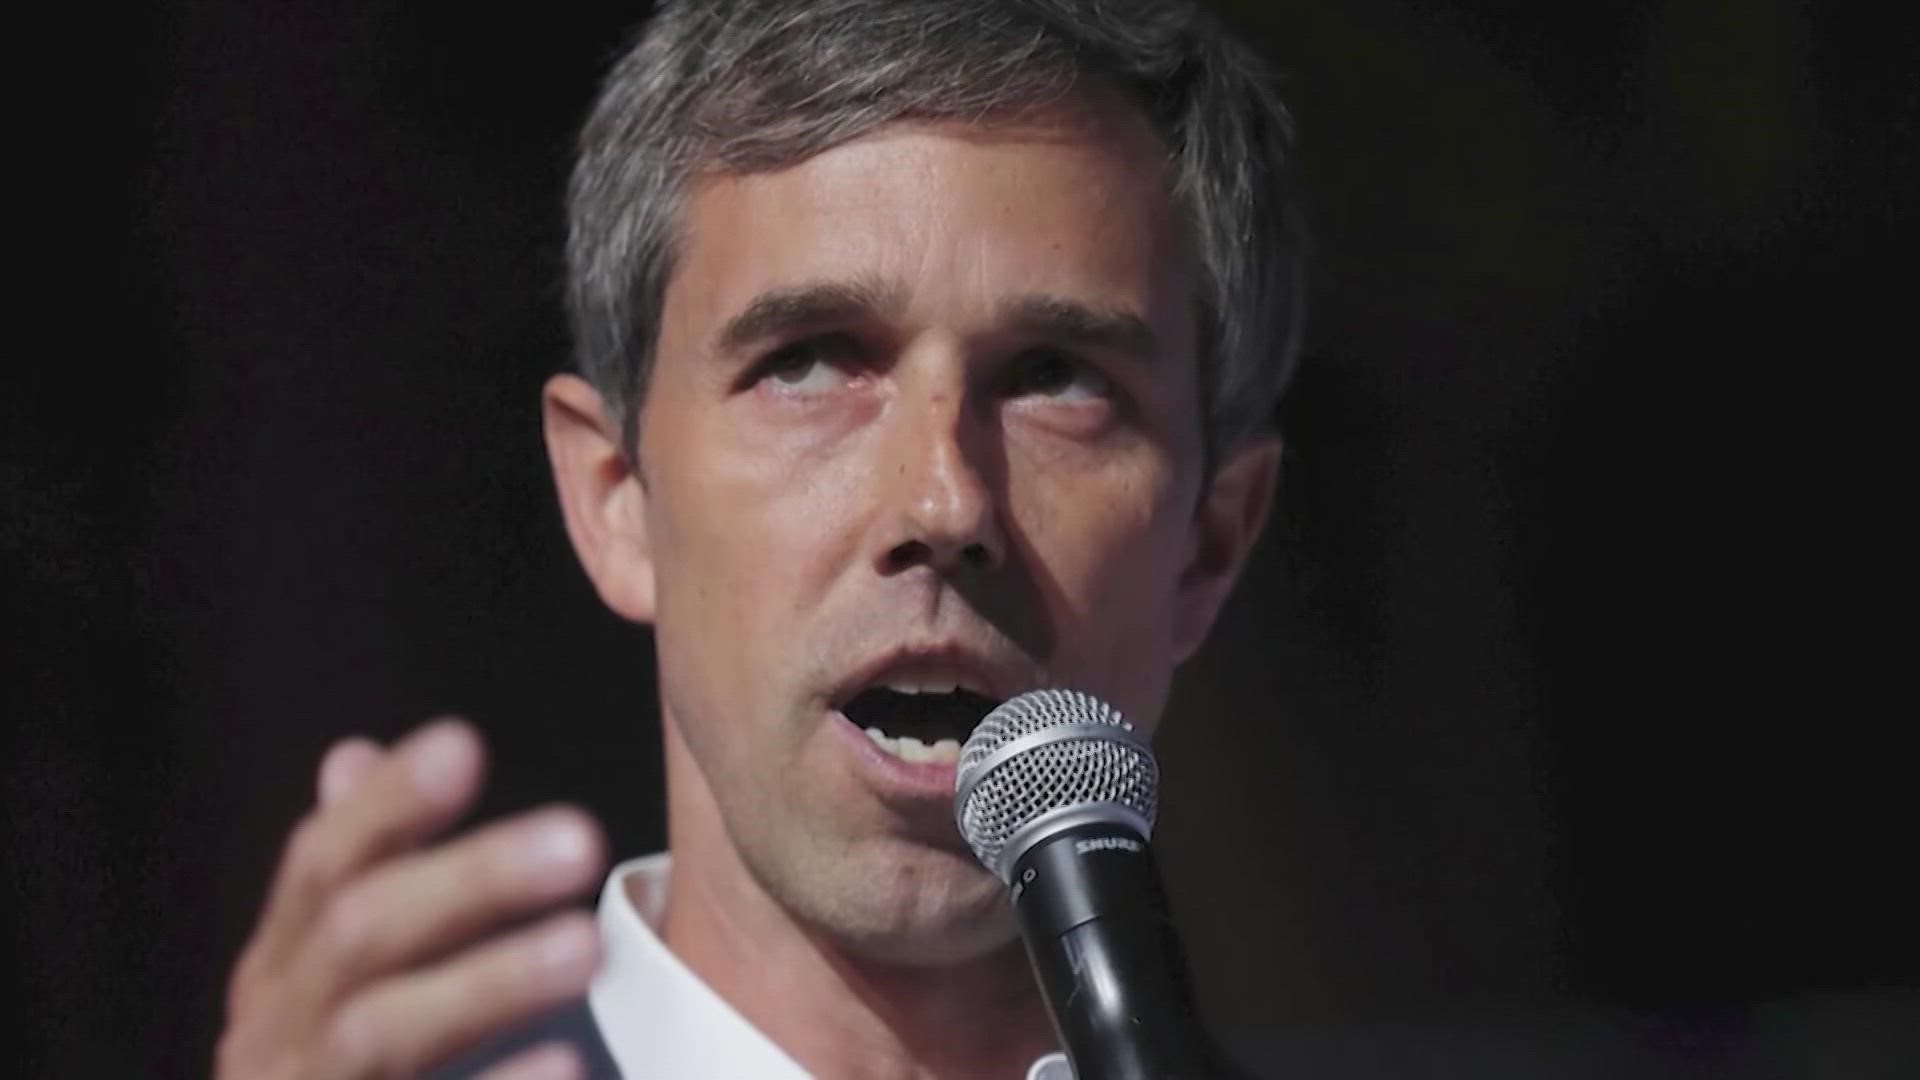 According to Axios, O'Rourke will announce later this year his plans to challenge Gov. Abbott.